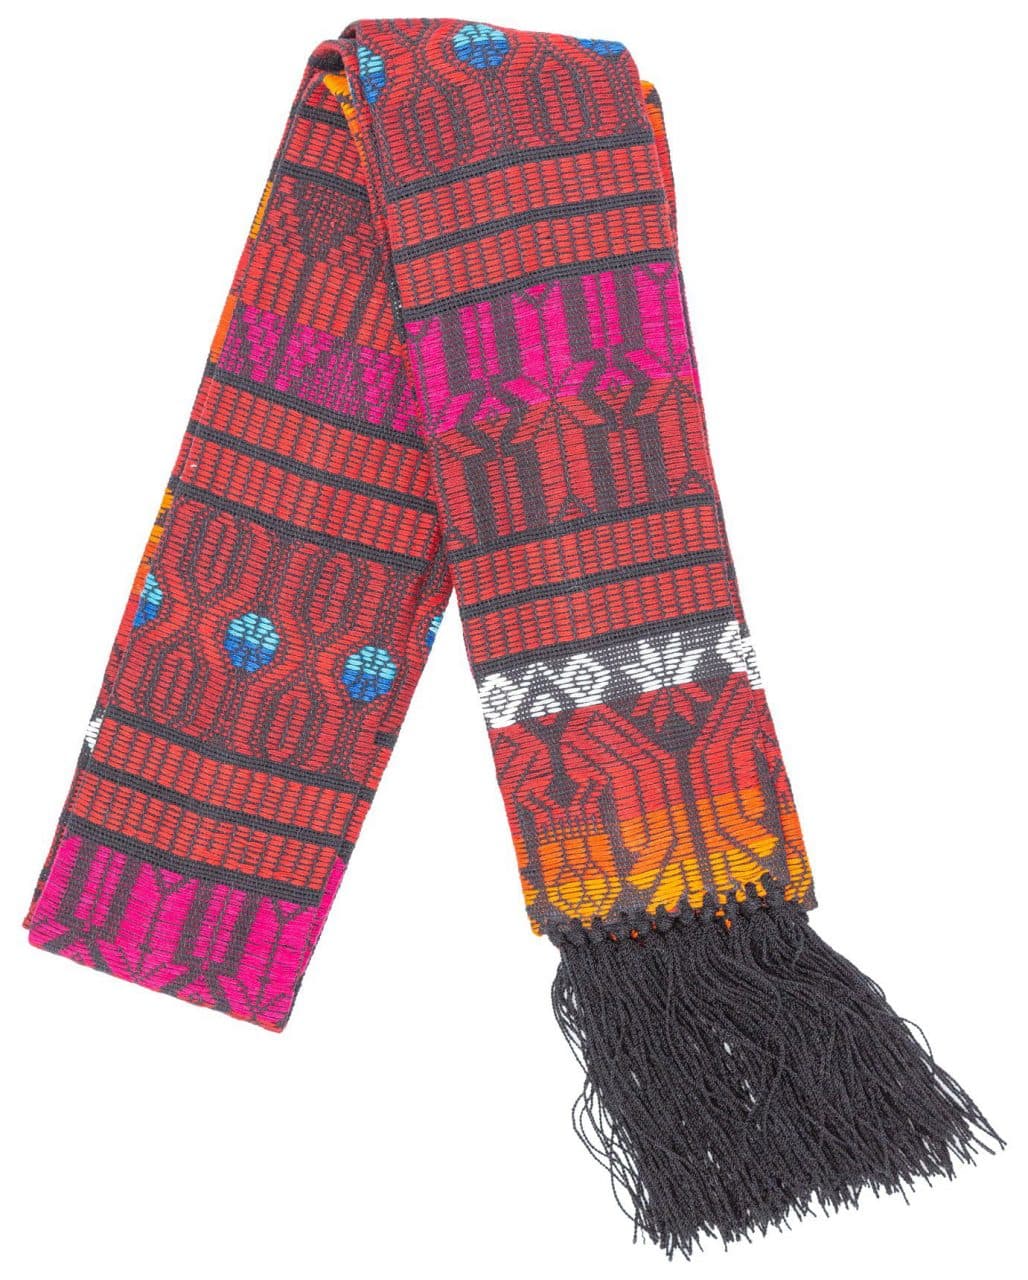 Brocaded Clerical Stole - Red